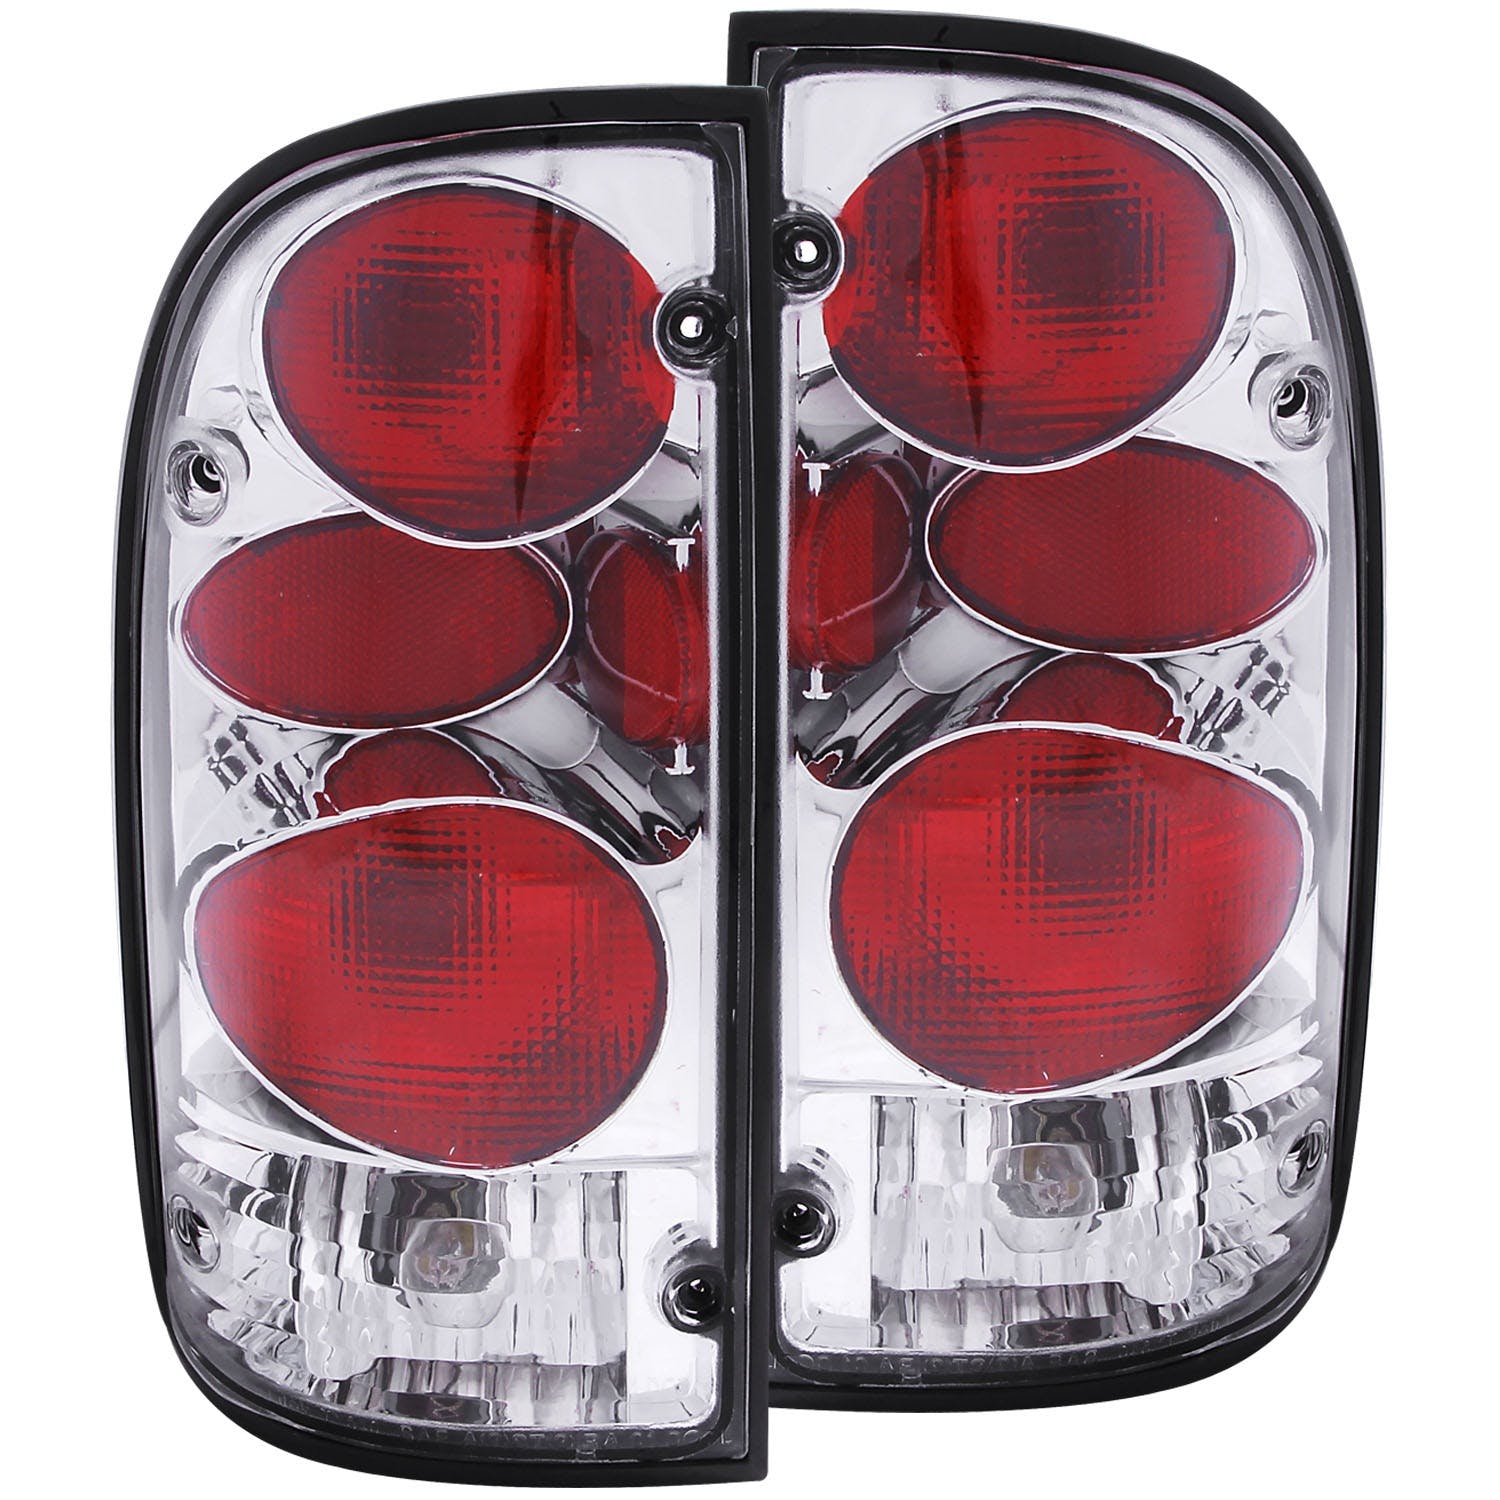 AnzoUSA 211127 Taillights Chrome